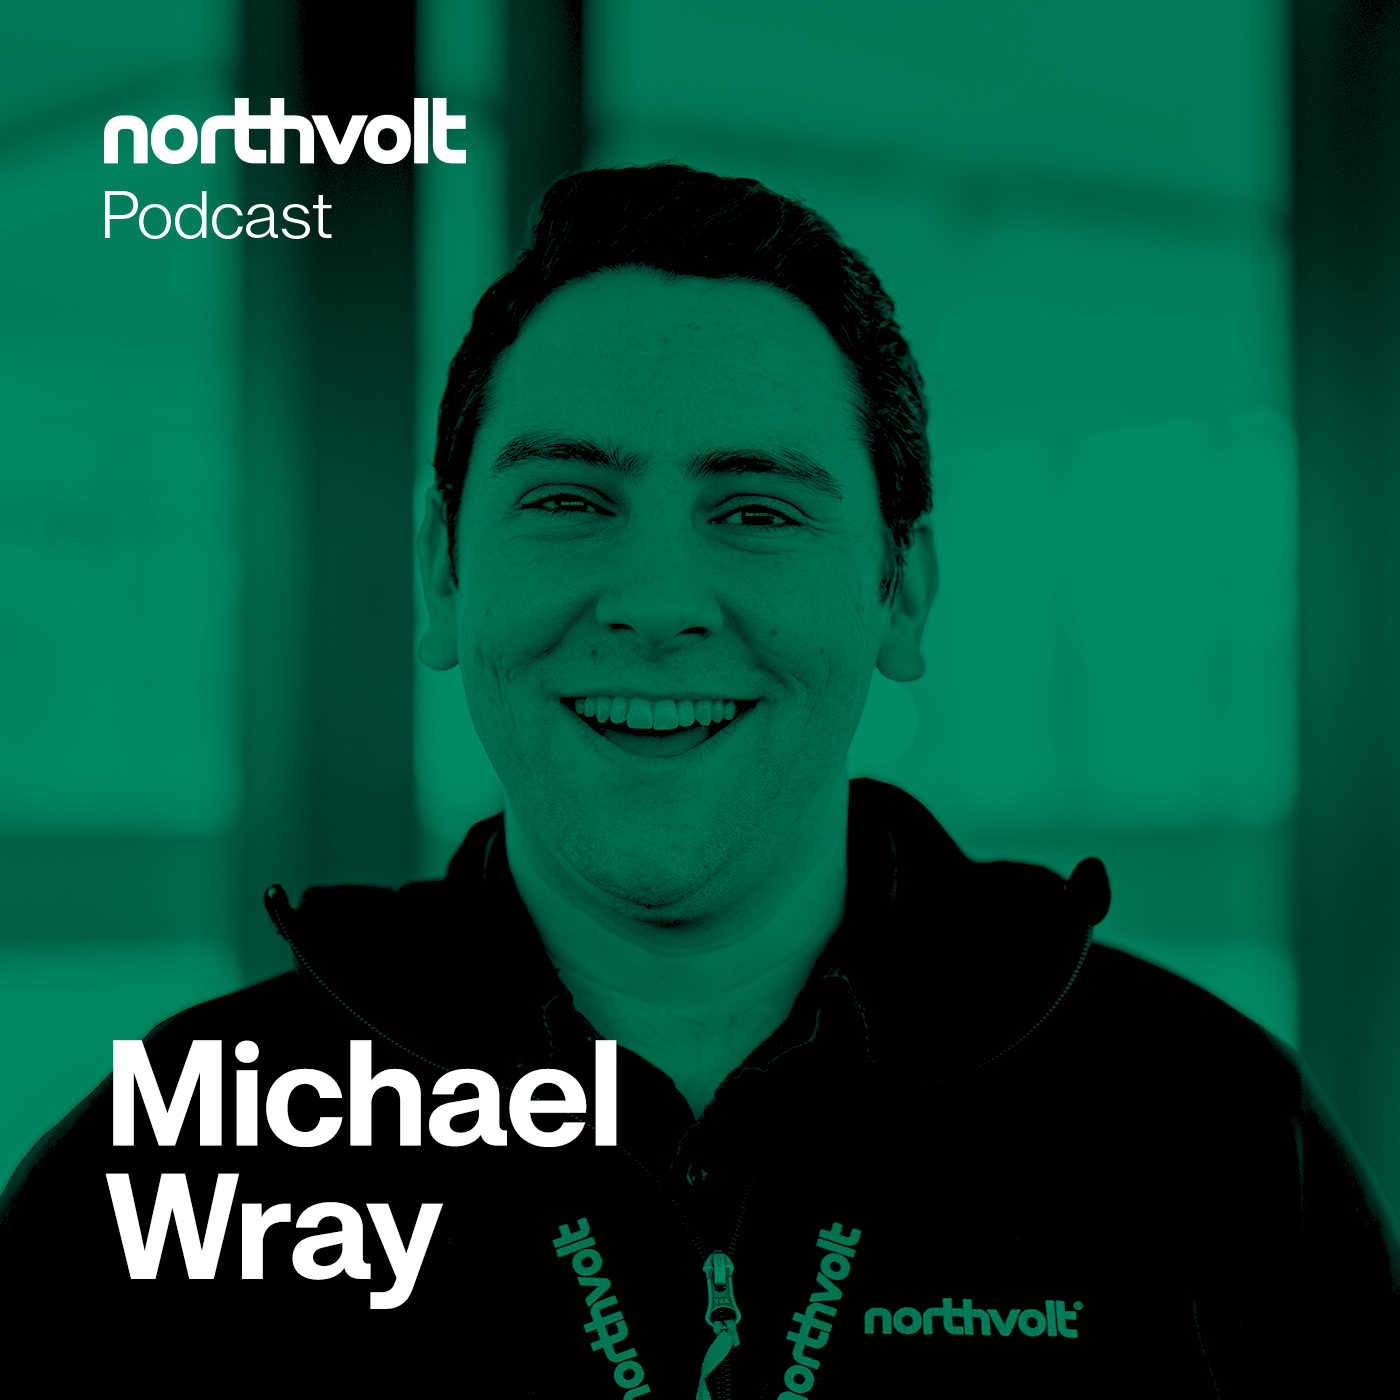 Challenge Accepted: Michael Wray